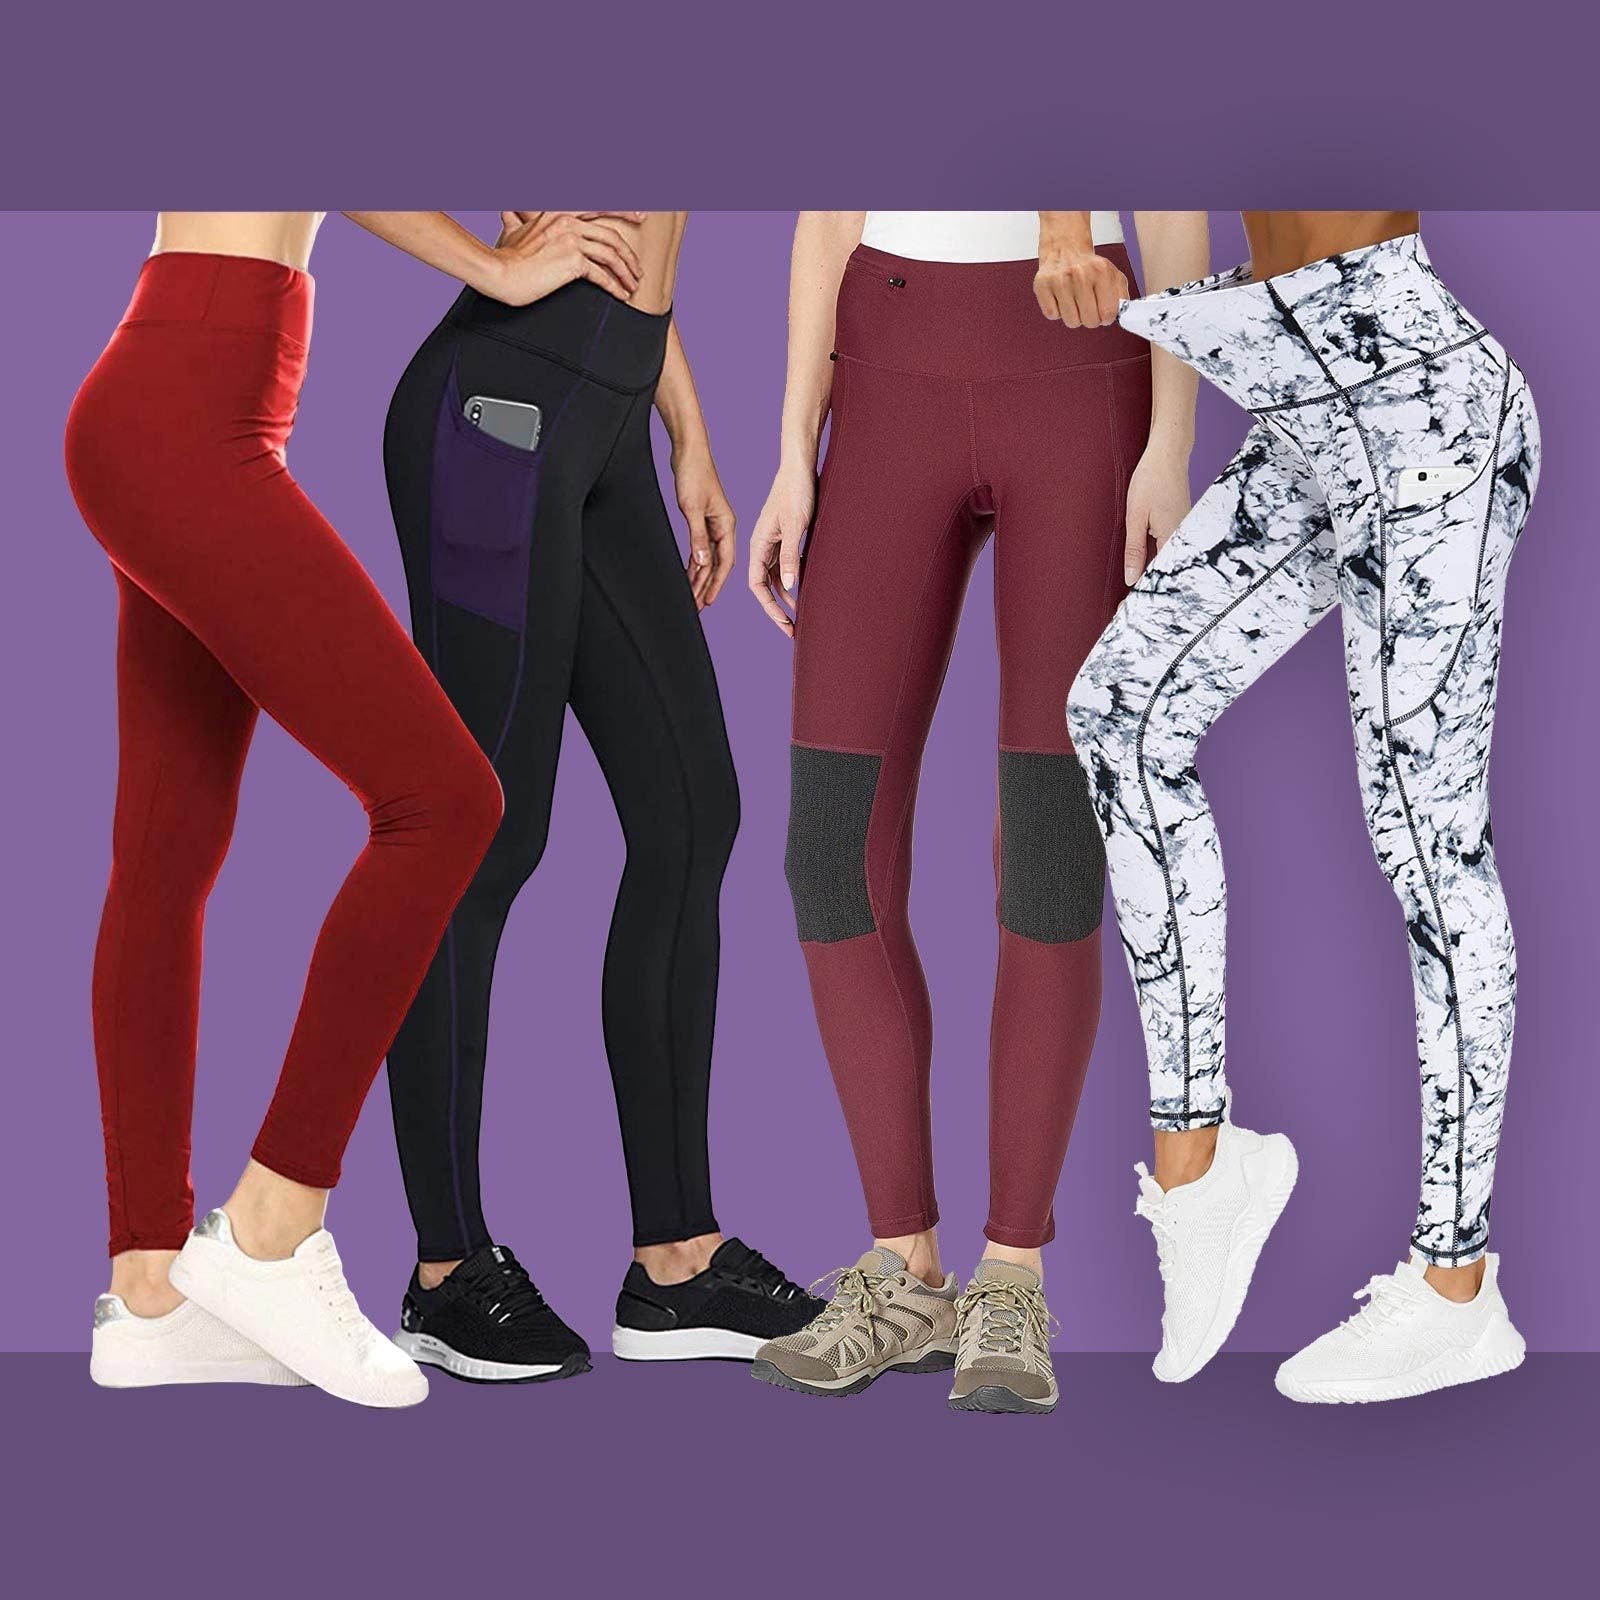 Which Fabrics are Best for Making Leggings? – fashionsfl